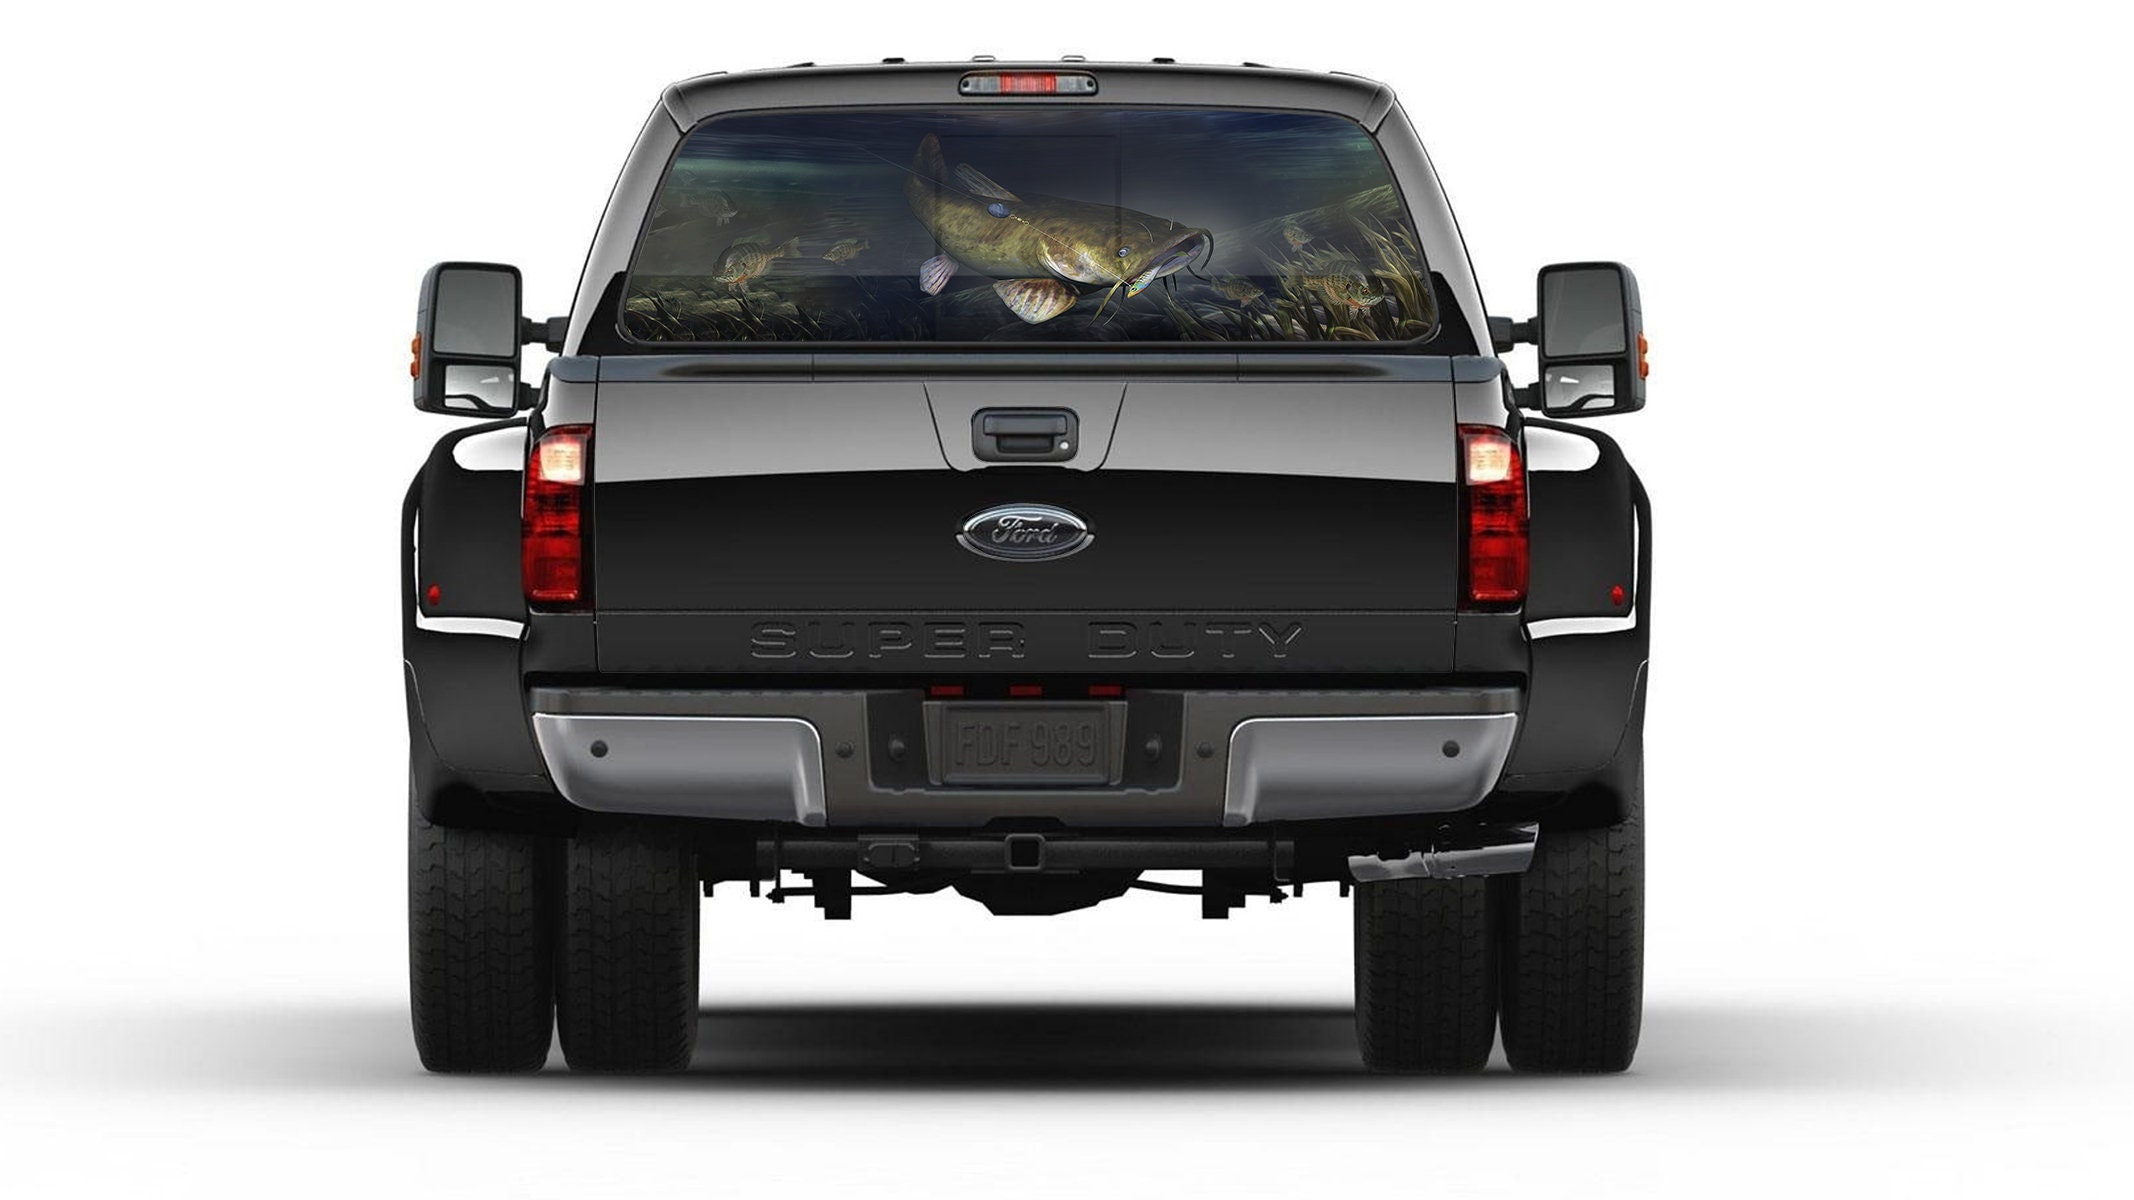 Catfish Shad Rear Window Perforated Graphic Decal Sticker Truck